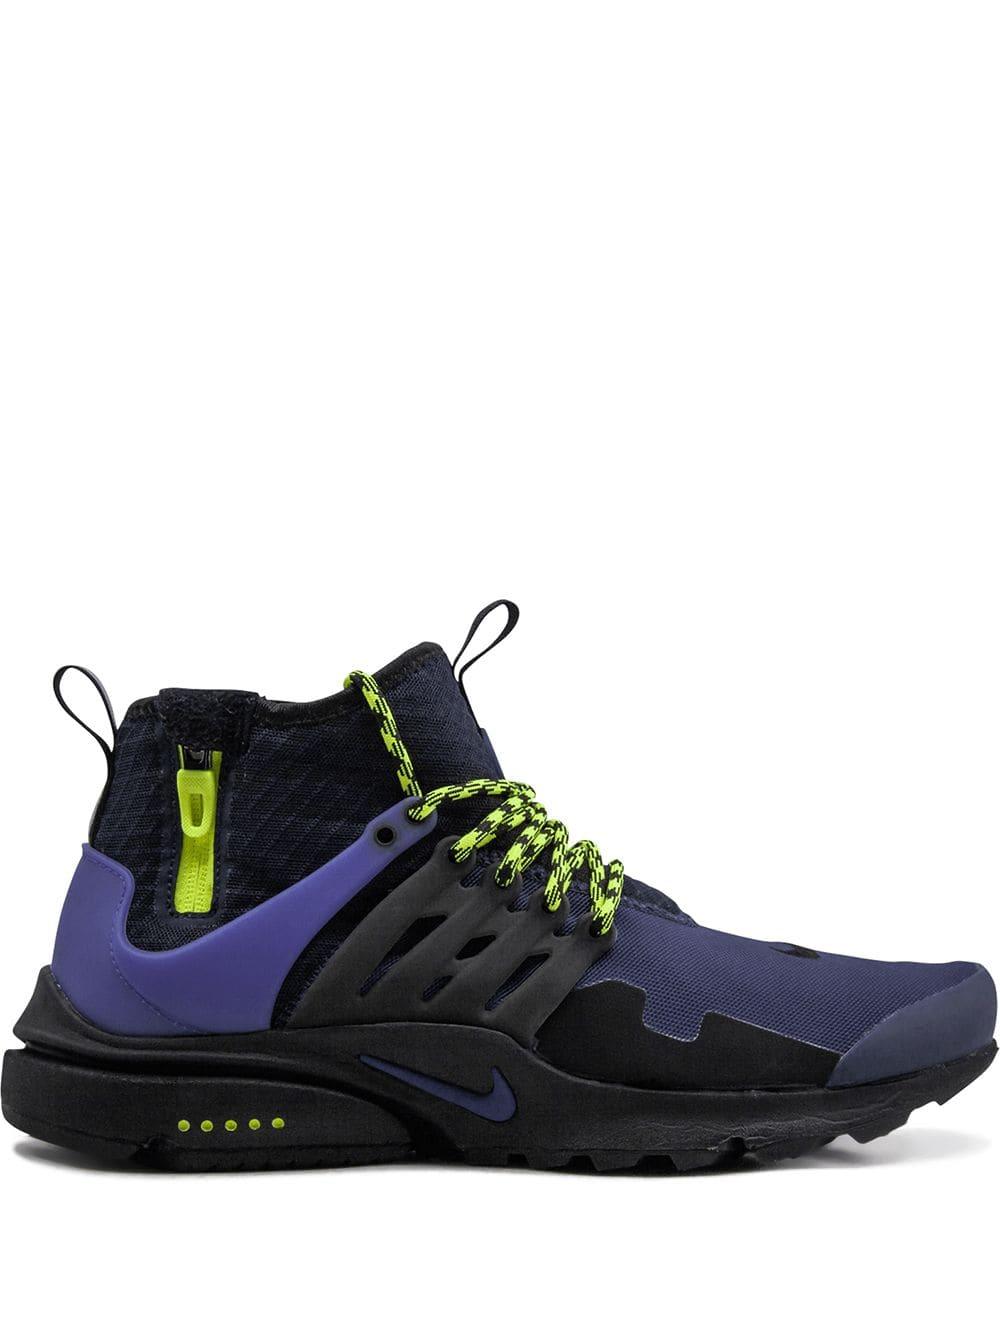 Nike Air Presto Mid Utility Shoes - Size 9 in Navy (Blue) for Men - Lyst